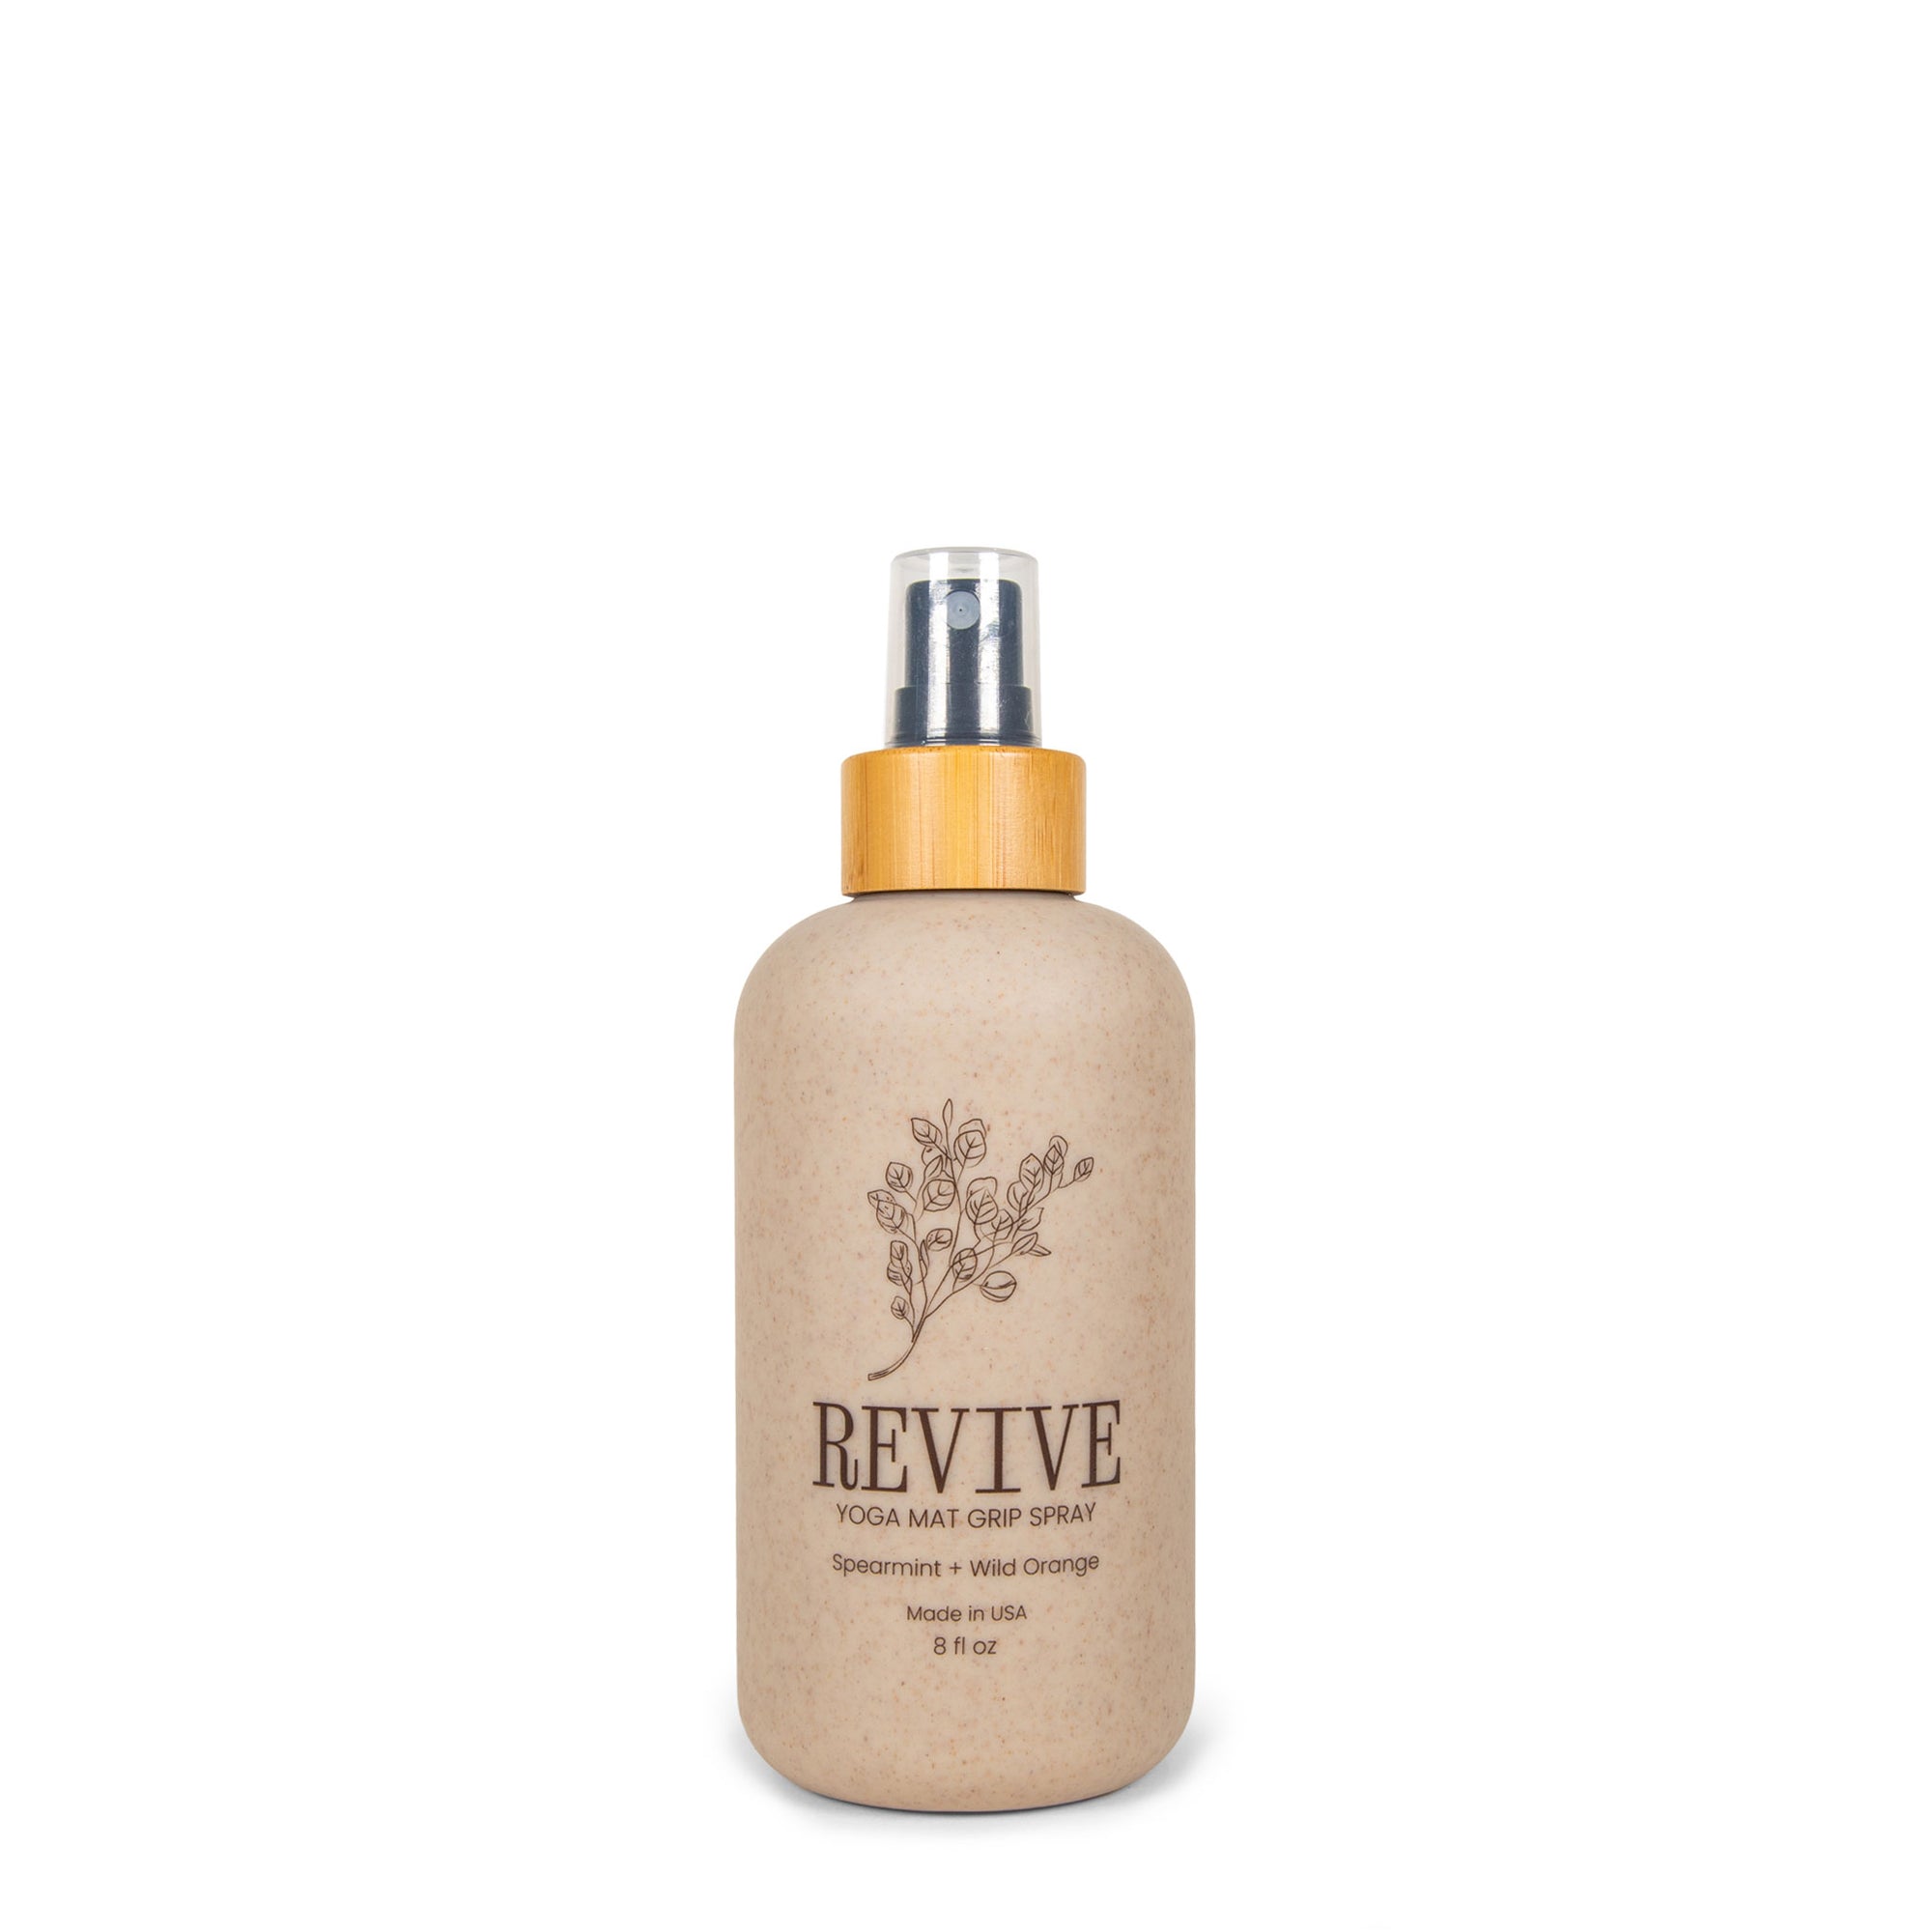 Increase Grip on Your Cork Yoga Mat - Revive Grip Spray